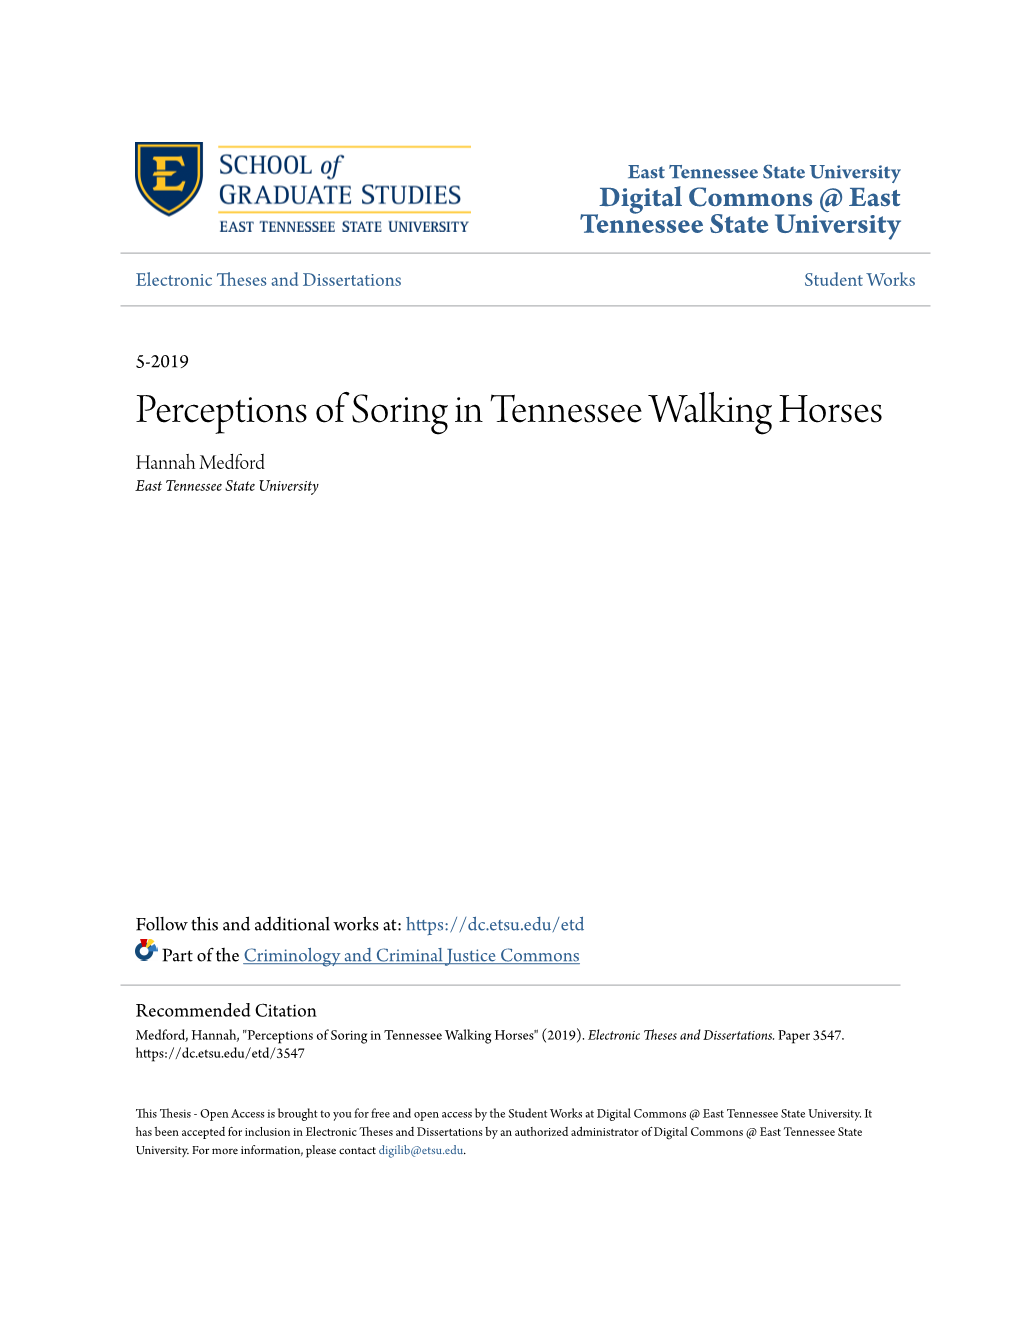 Perceptions of Soring in Tennessee Walking Horses Hannah Medford East Tennessee State University